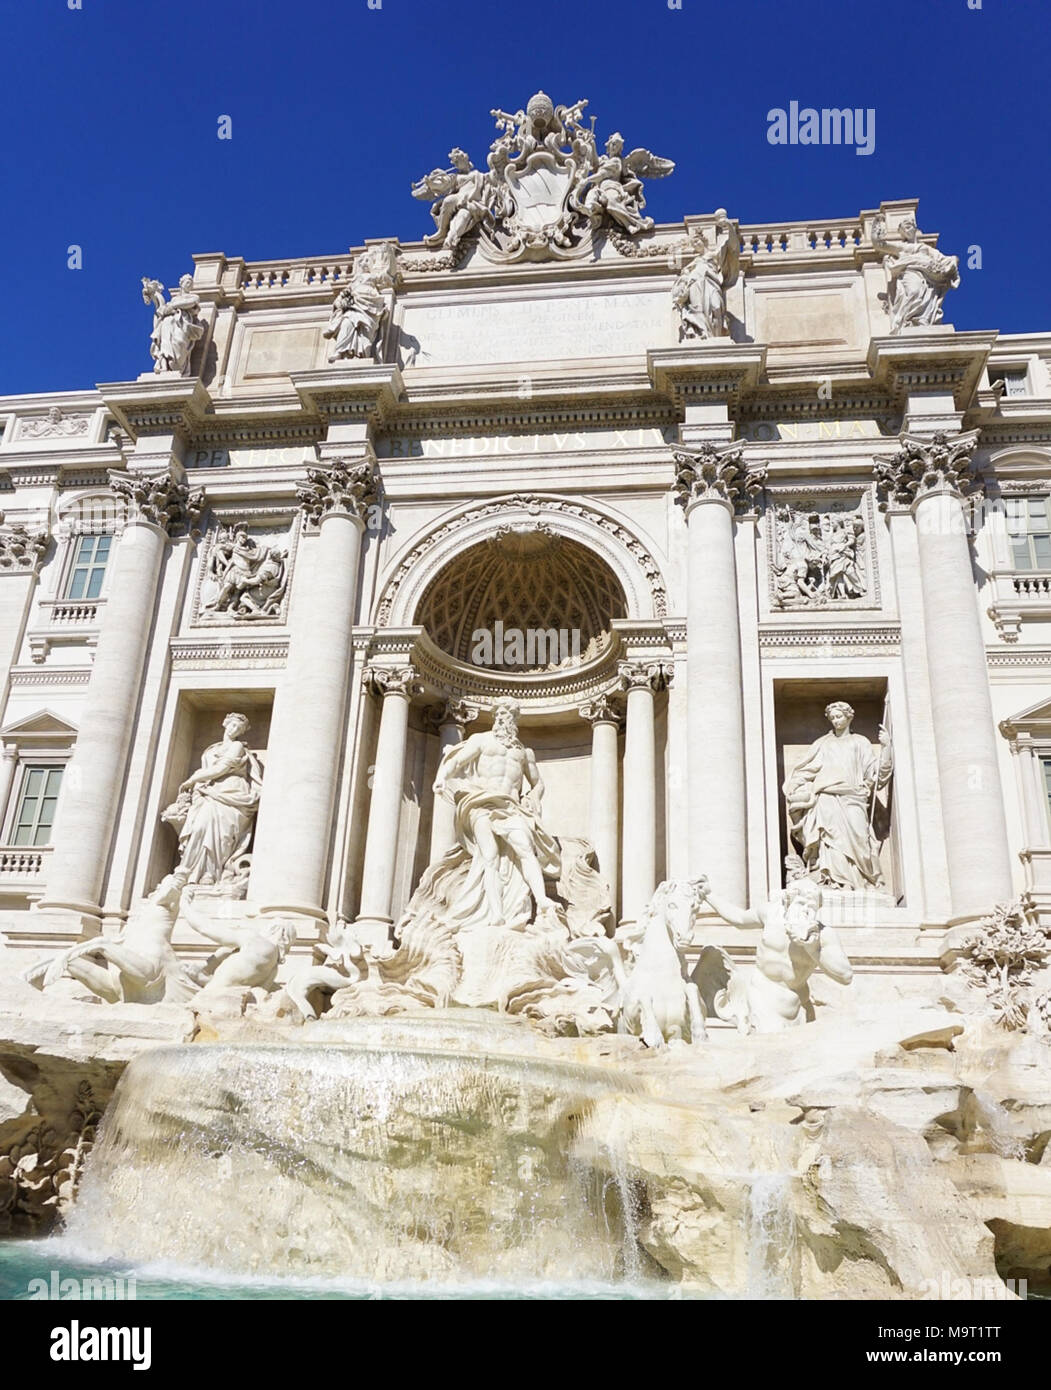 An upclose view of the historical Trevi Fountain in Rome Italy. Stock Photo